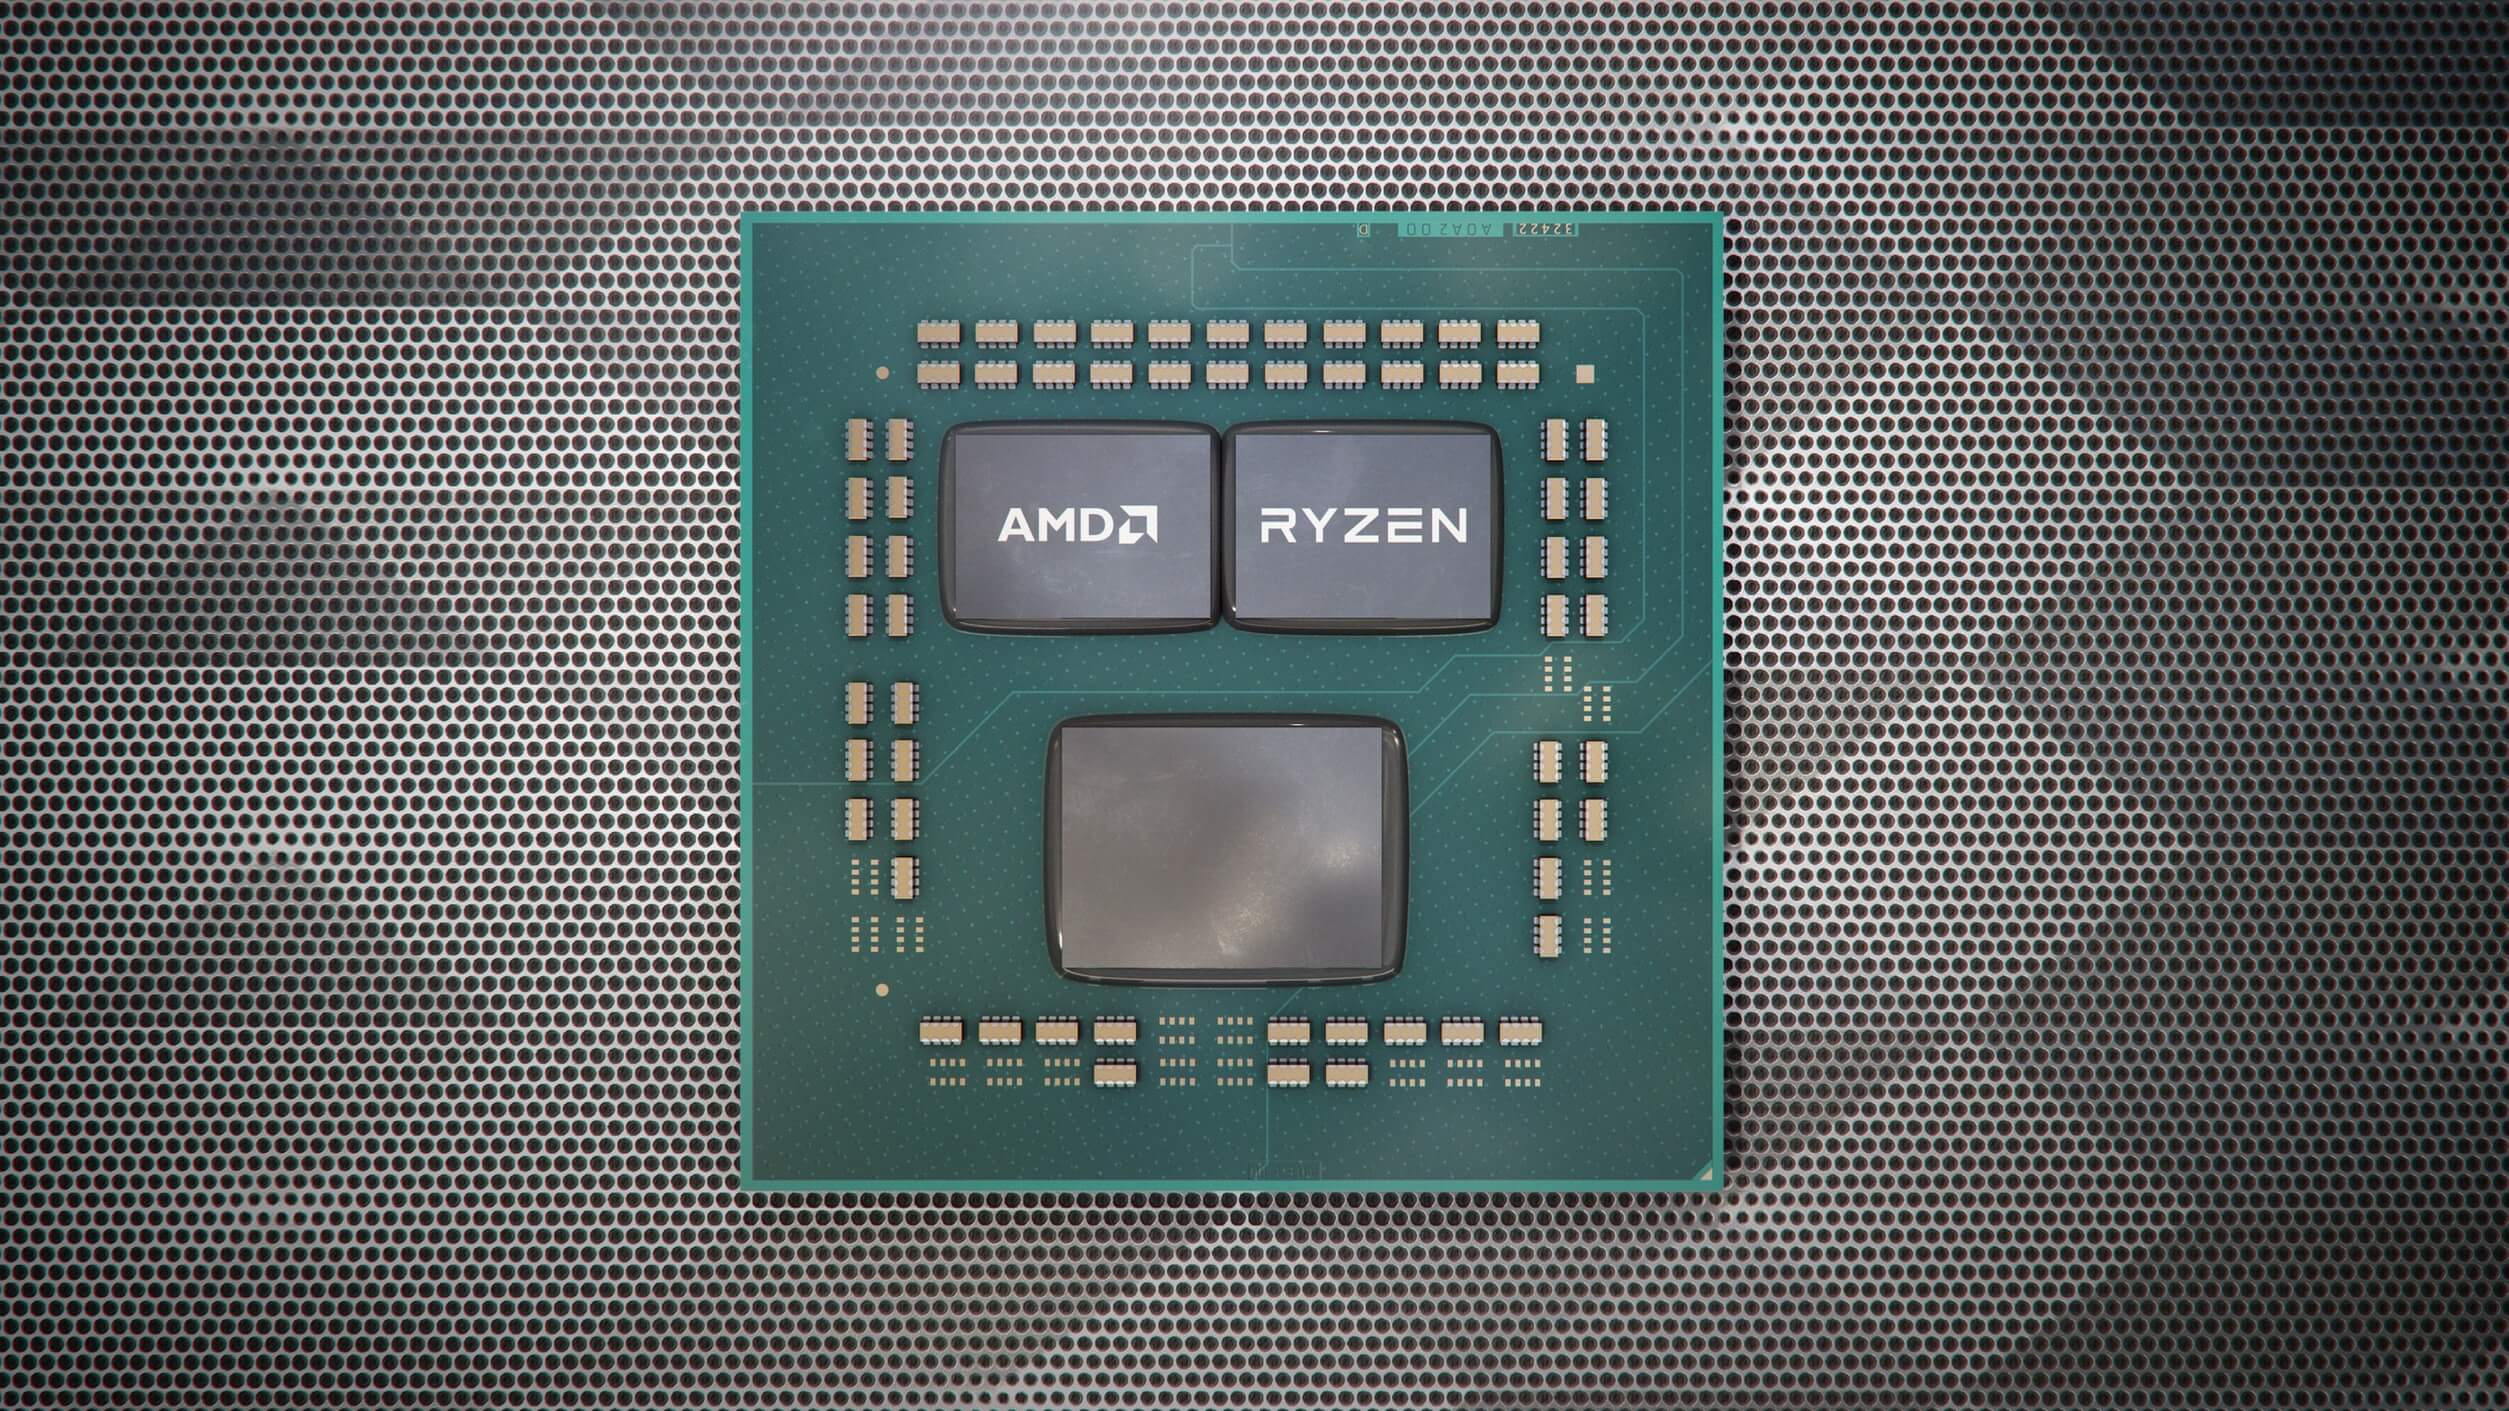 Opinion: AMD's gamble now paying off